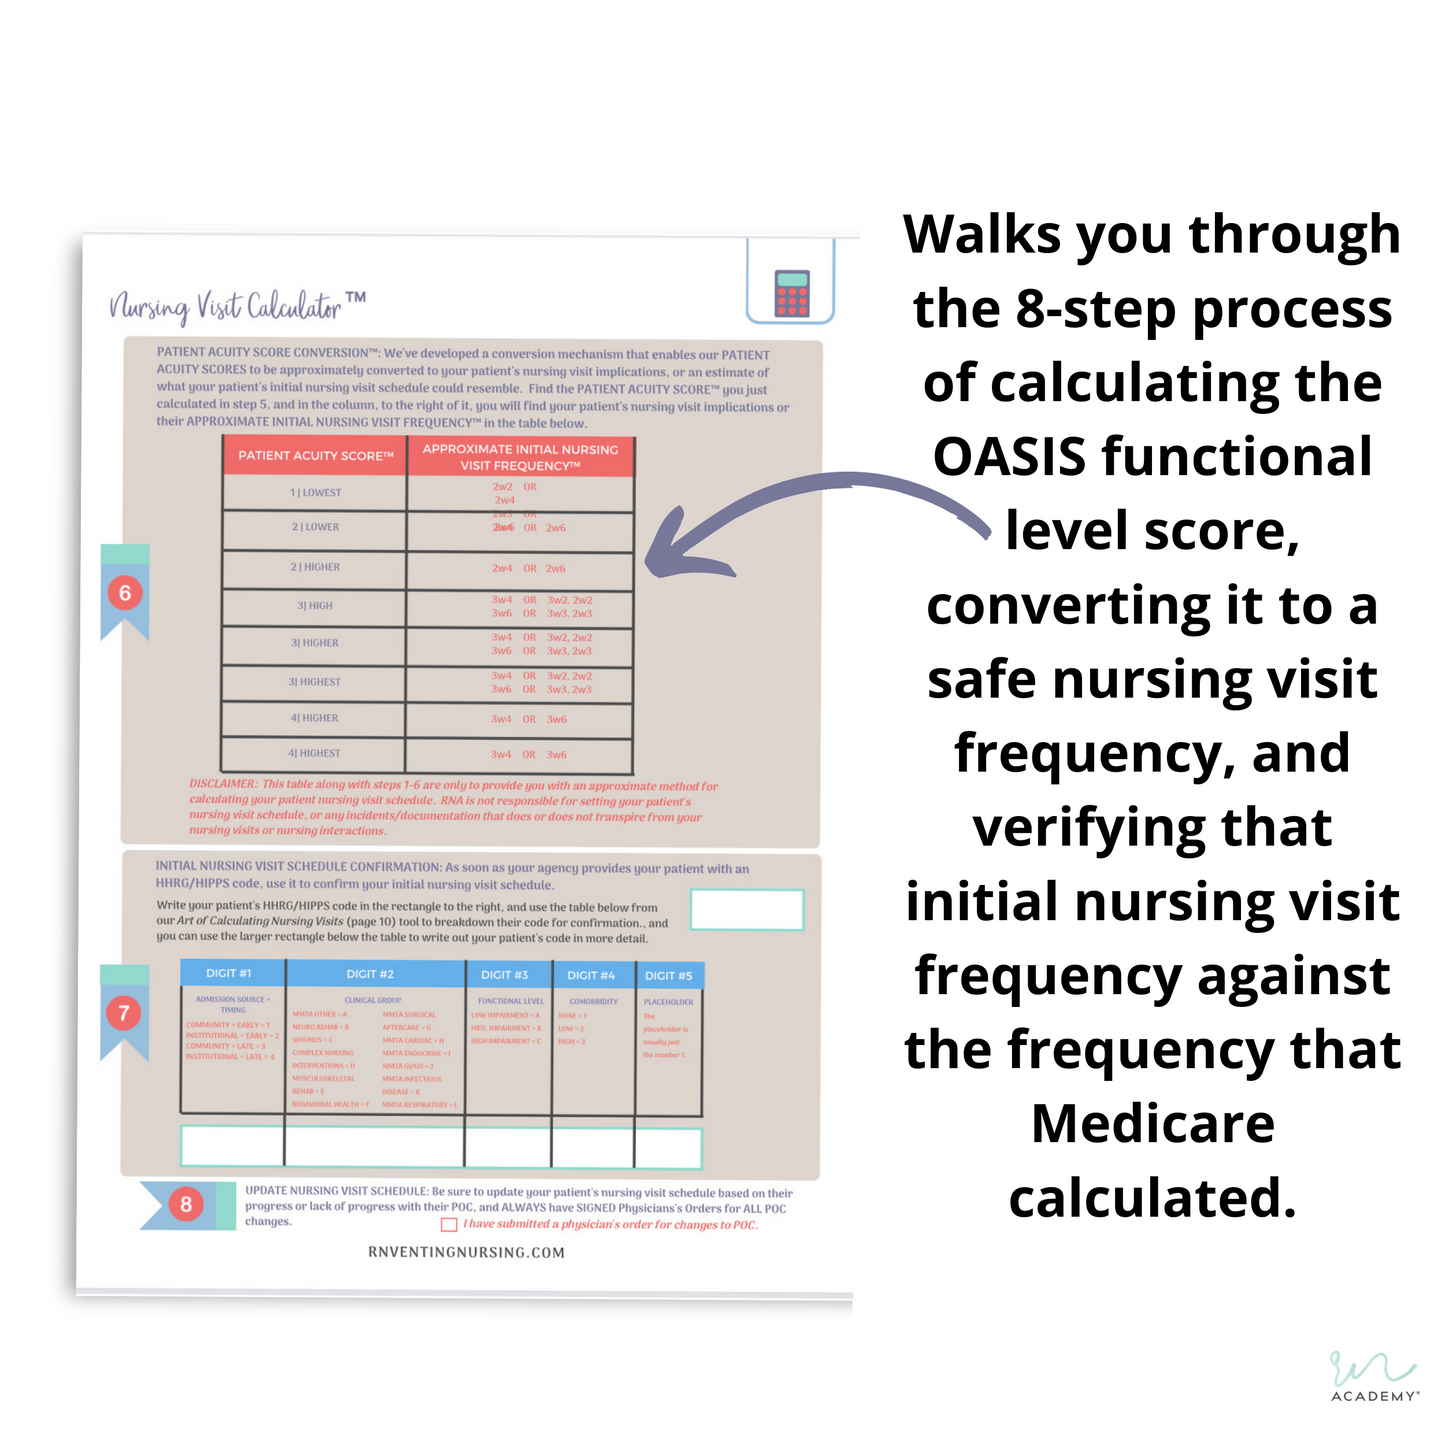 The Art of Calculating Nursing Visits™, Easy Answers for OASIS Functional and BIMS Scores™, and Nursing Visit Calculator Bundle